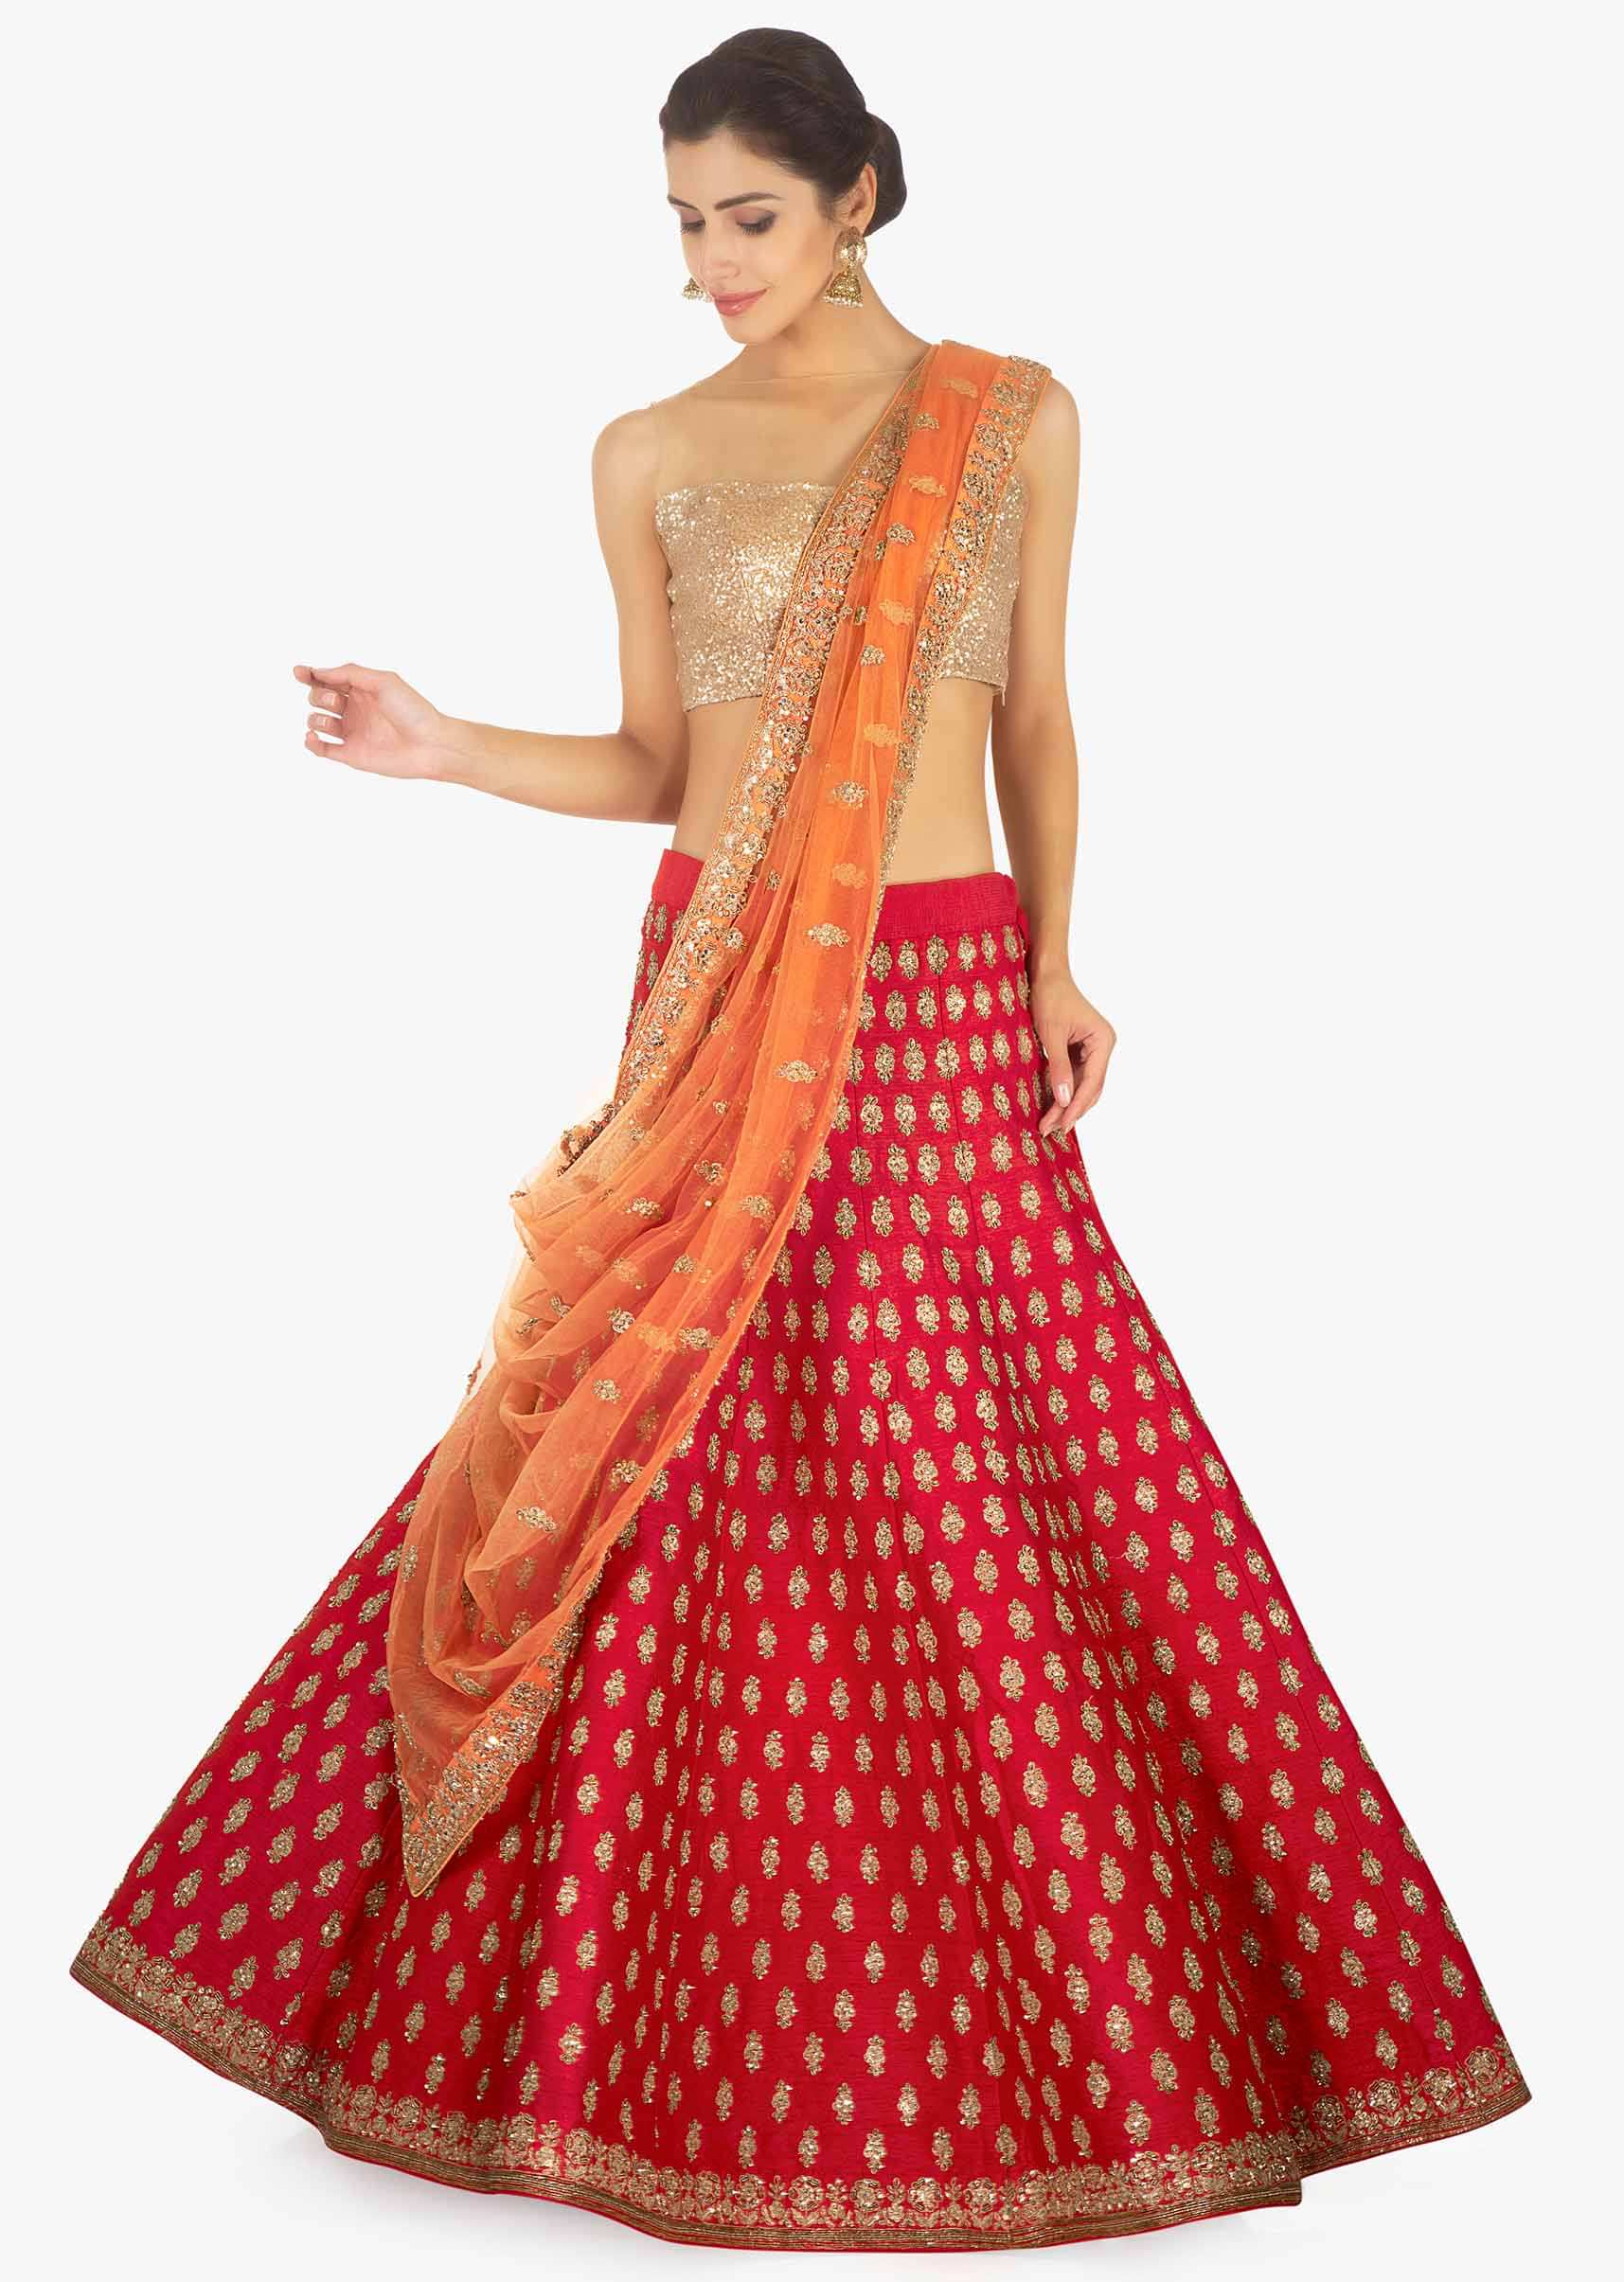 Red raw silk lehenga and blouse paired with a contrasting peach net dupatta